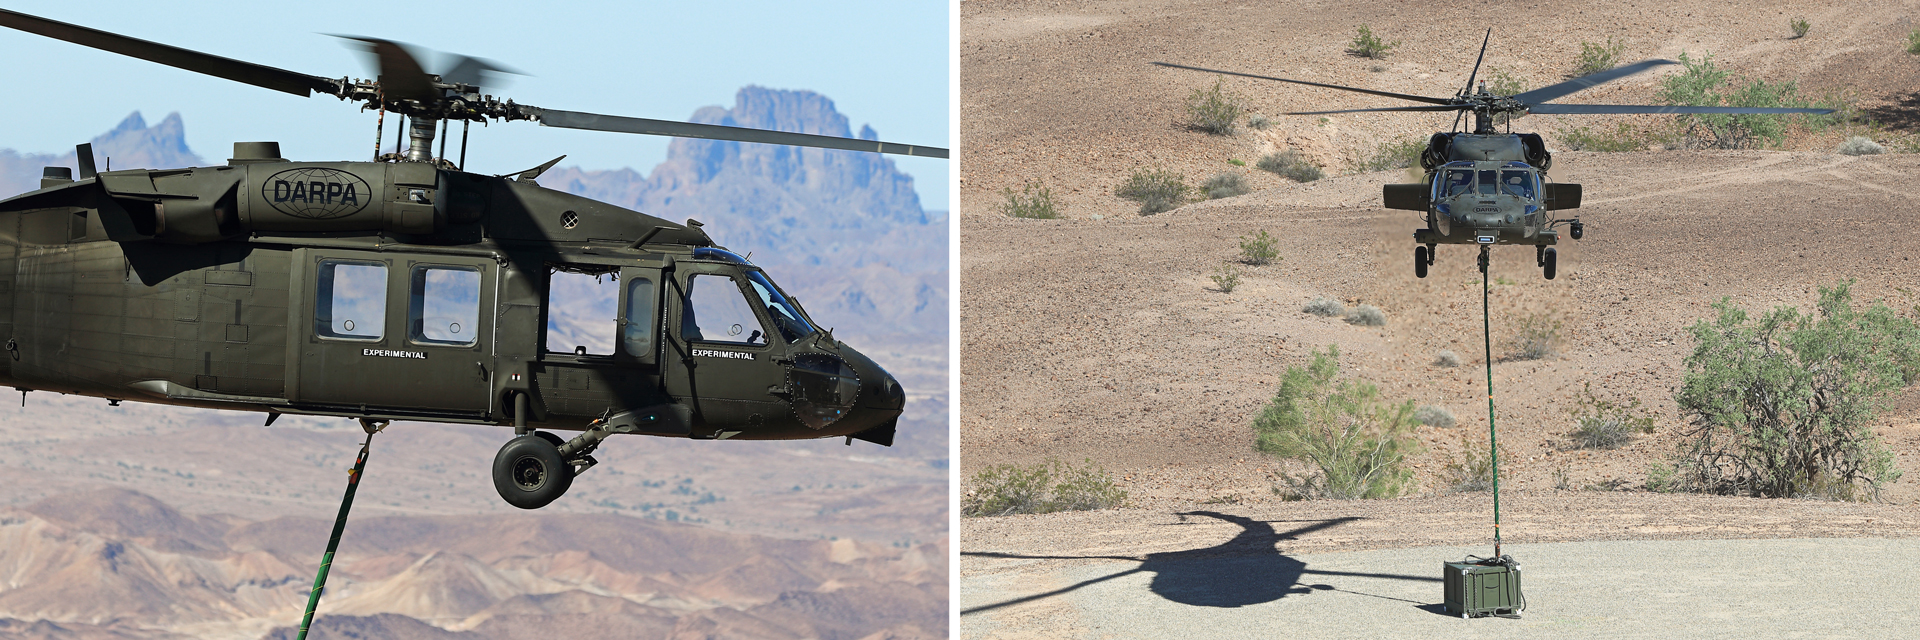 While transporting an external load, the autonomous Black Hawk helicopter was redirected by a ground controller located at the landing site to release its load, and then land to evacuate a casualty.